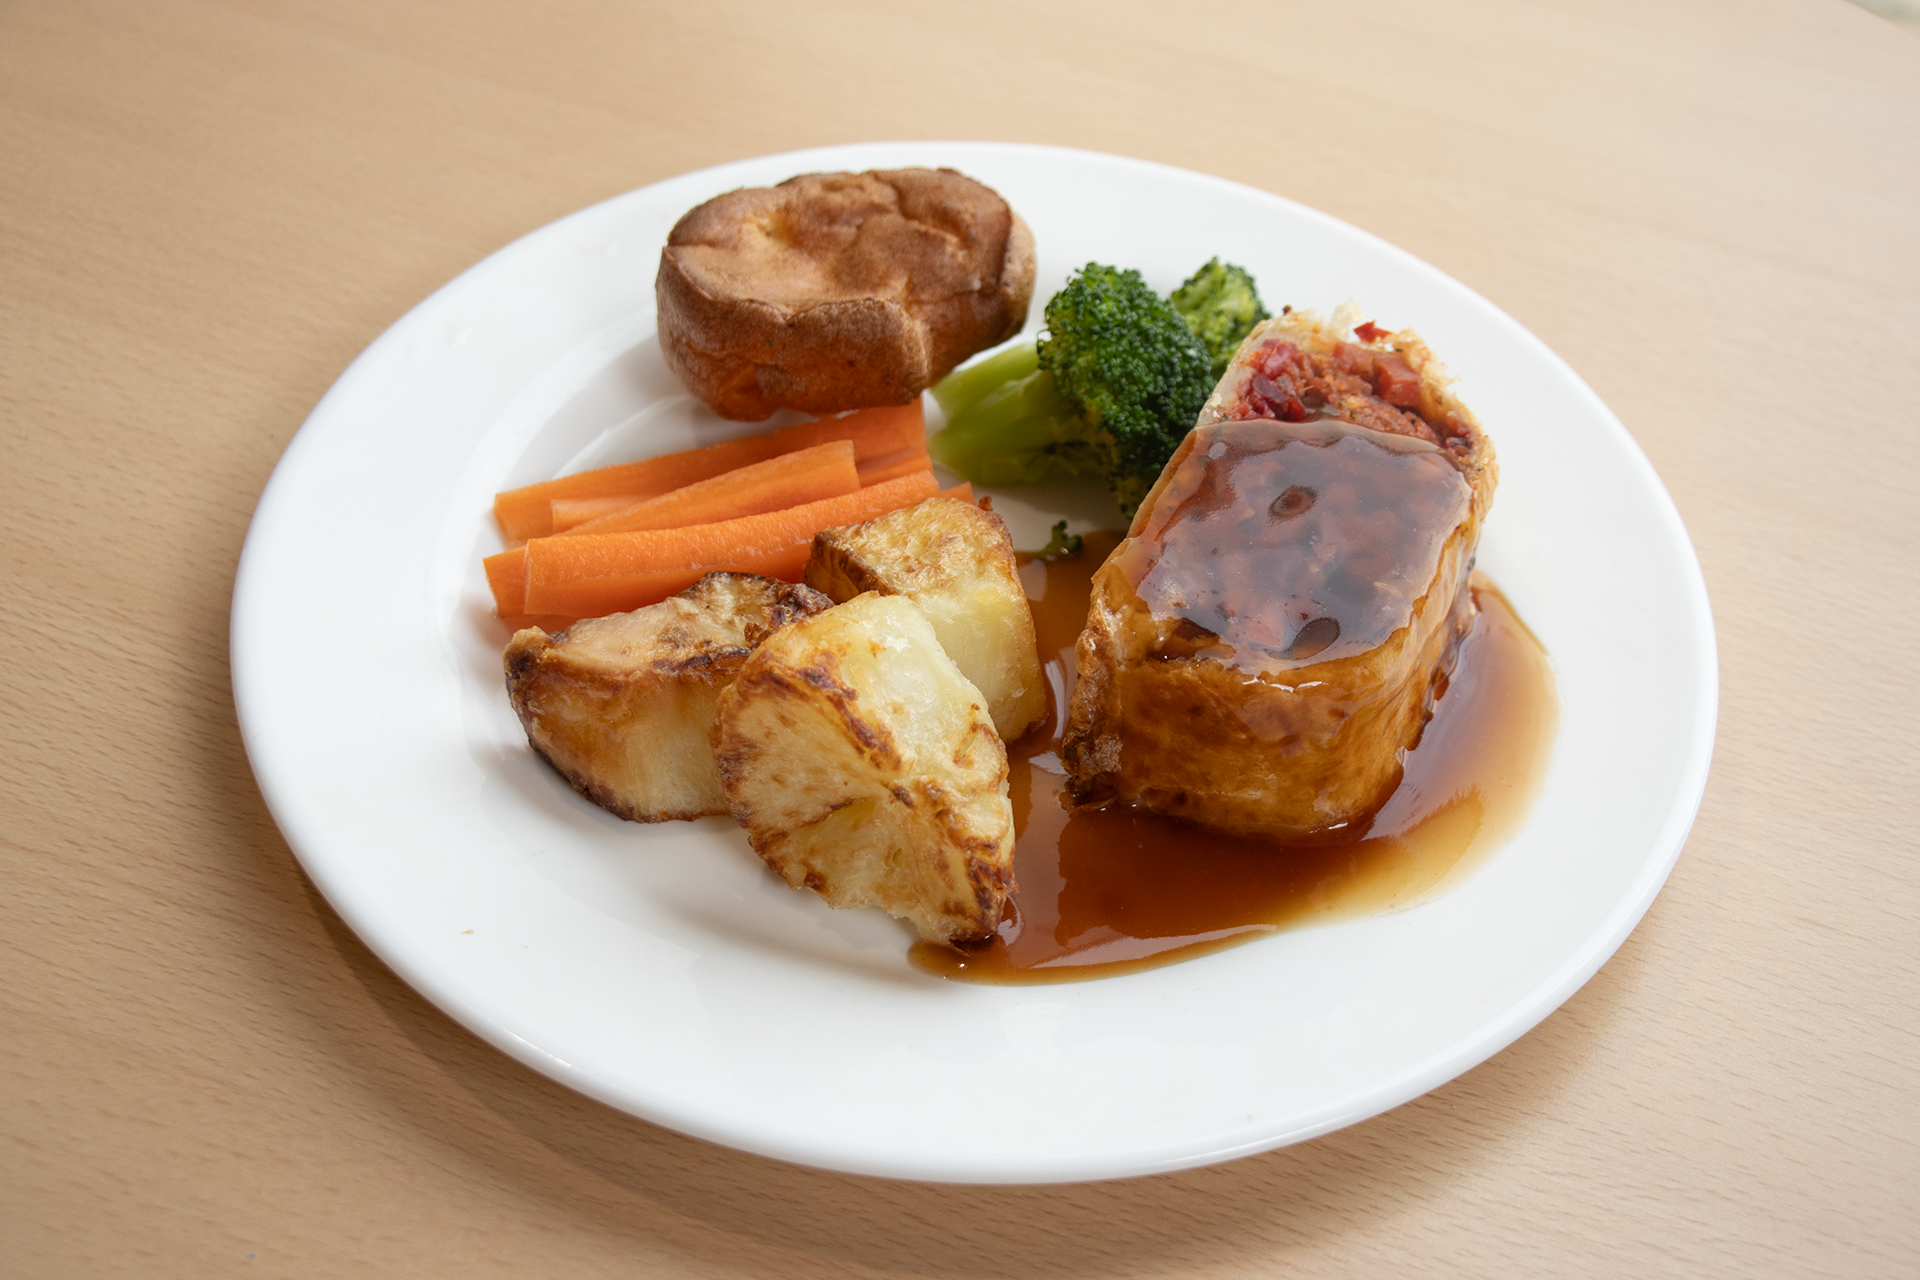 Vegetable Wellington, with Roast Potatoes, Carrots, Peas, Yorkshire Pudding and Gravy